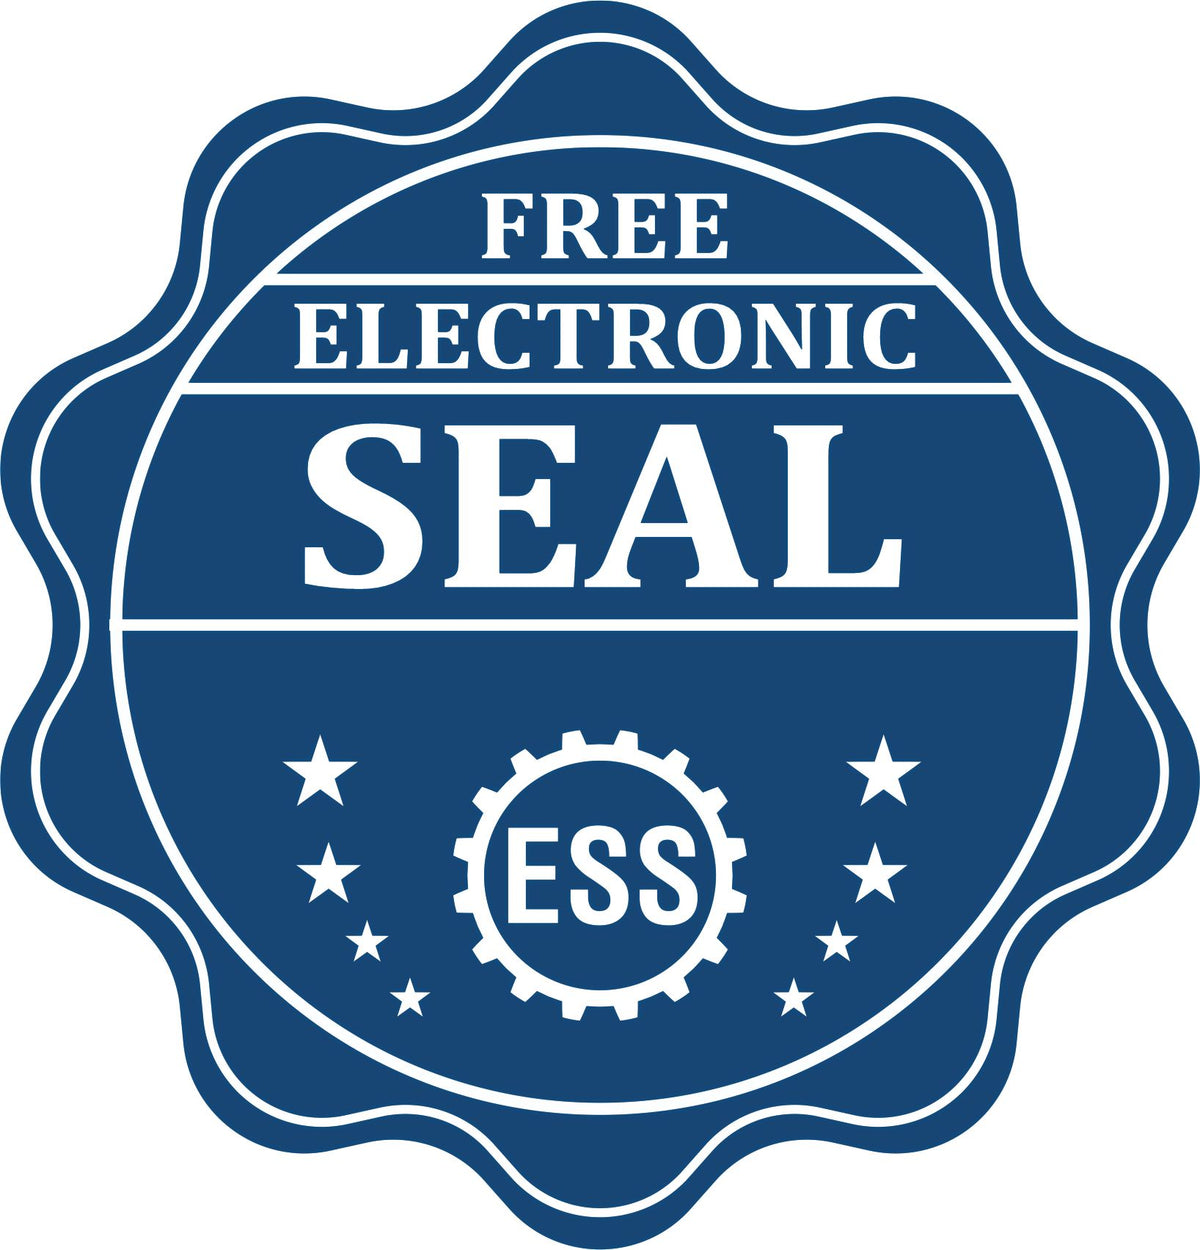 A badge showing a free electronic seal for the Heavy Duty Cast Iron Alabama Engineer Seal Embosser with stars and the ESS gear on the emblem.